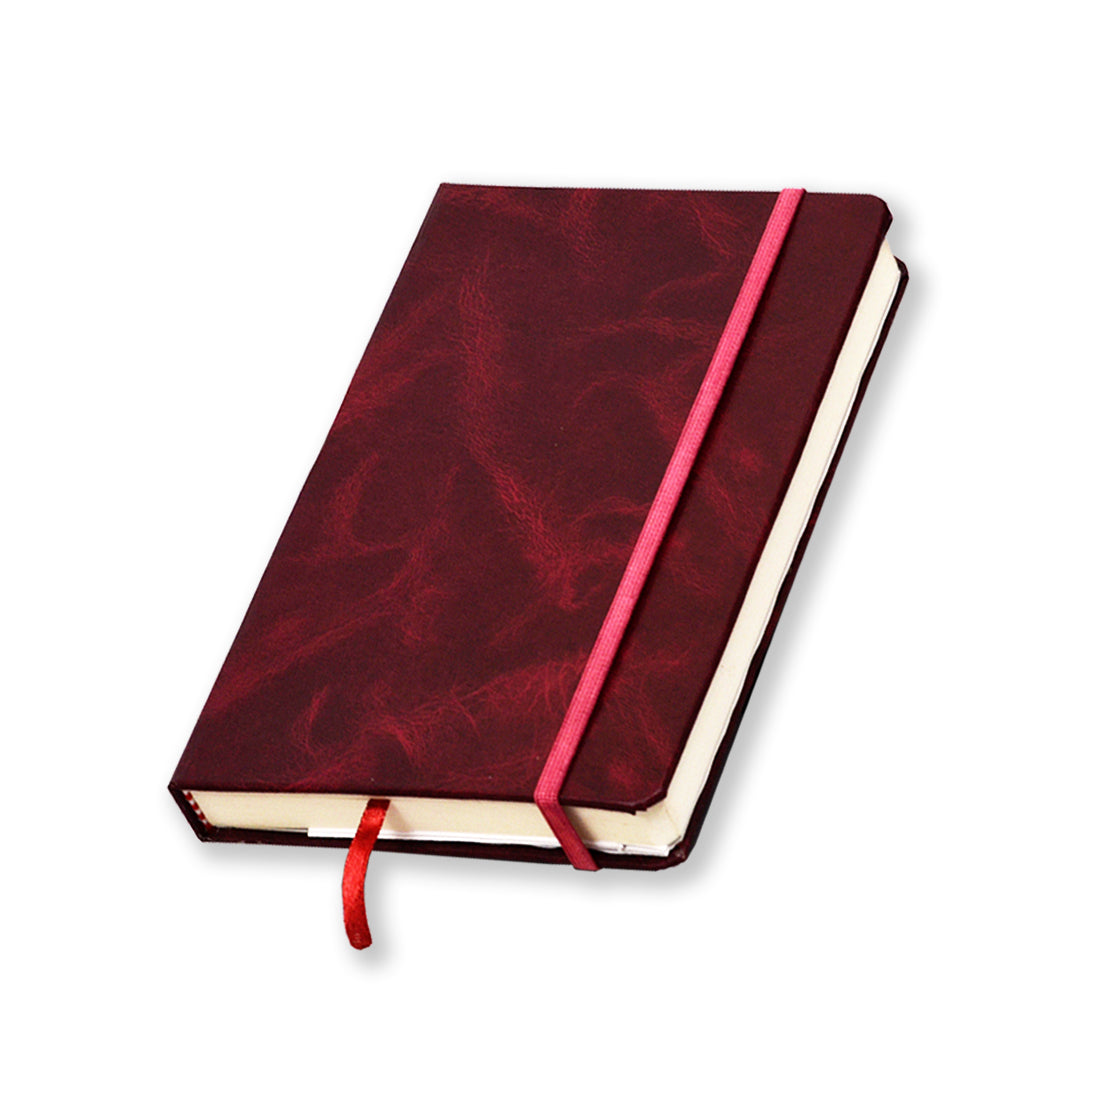 Hard Bound Notebook, Ruled, 240 Pages Journal Diary (Red)